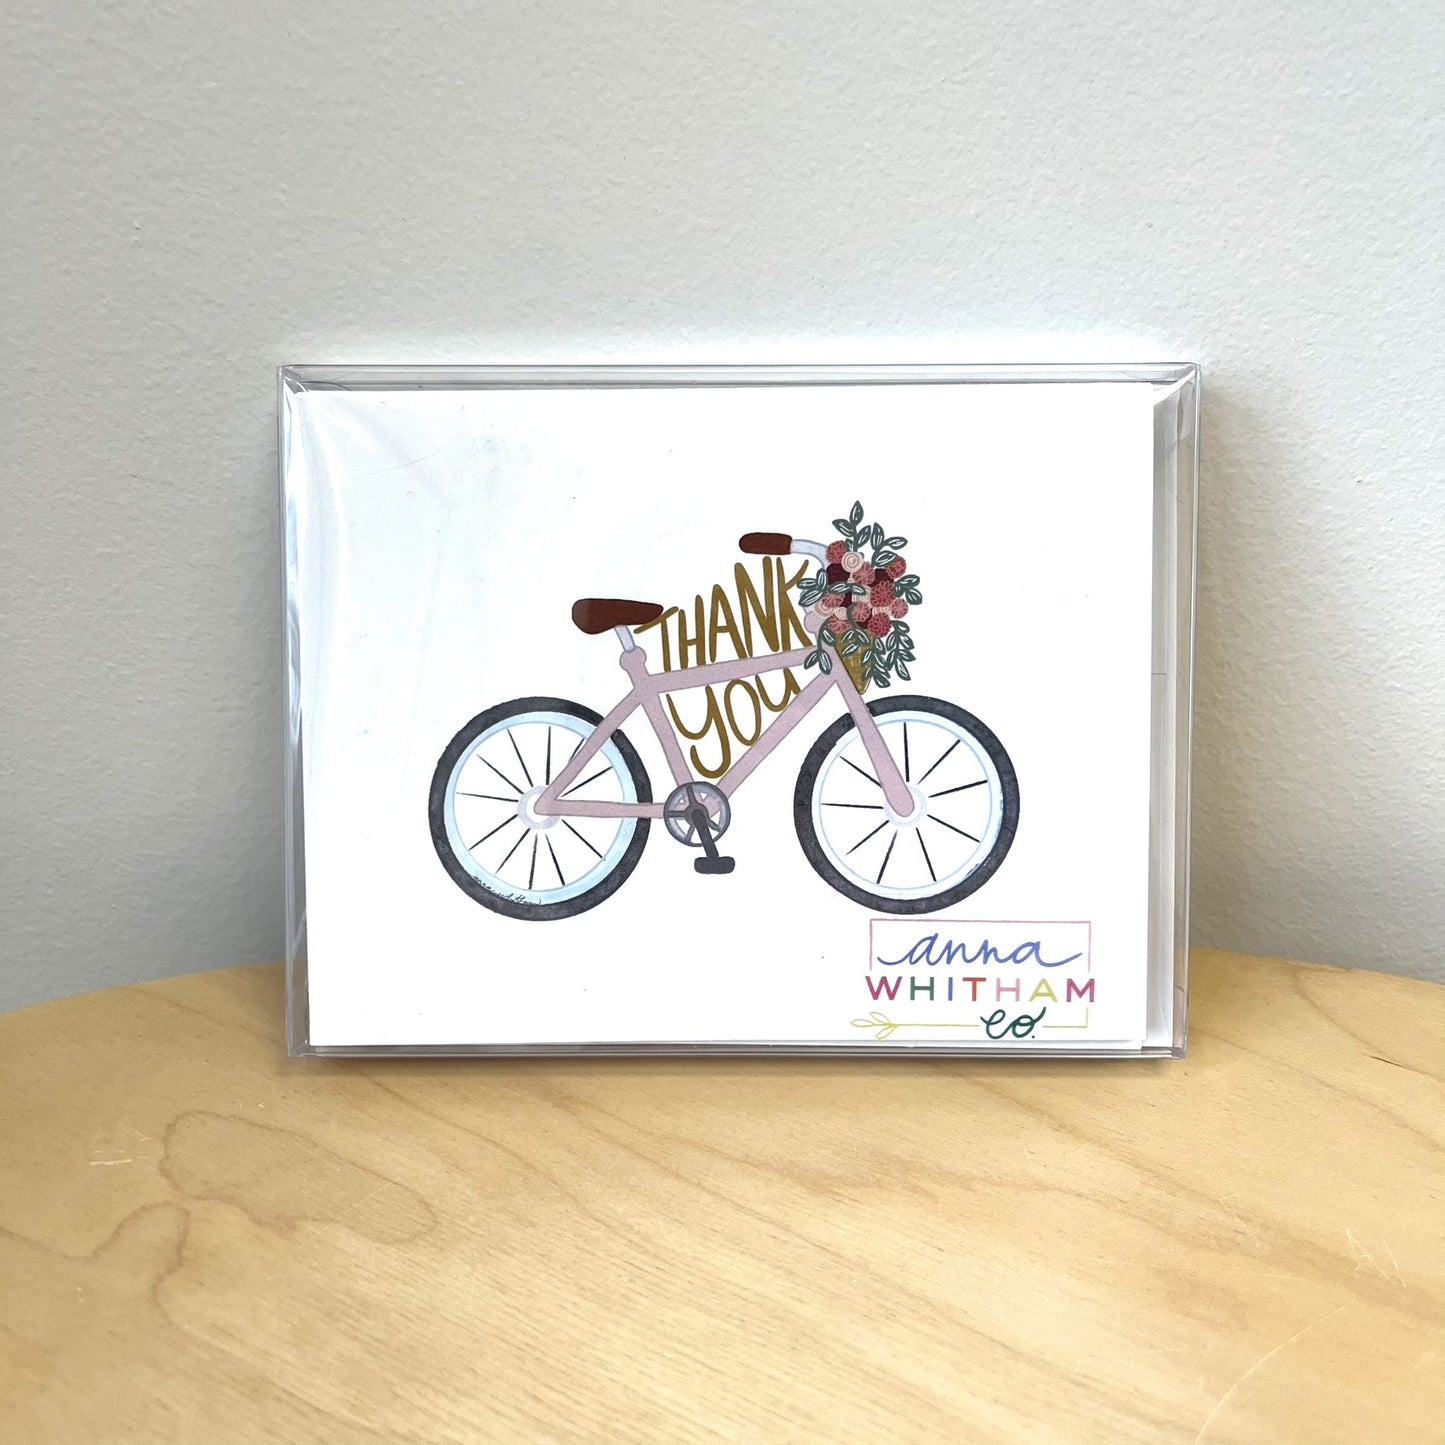 Thank You Cards - Bike with Flowers (Set of 6)